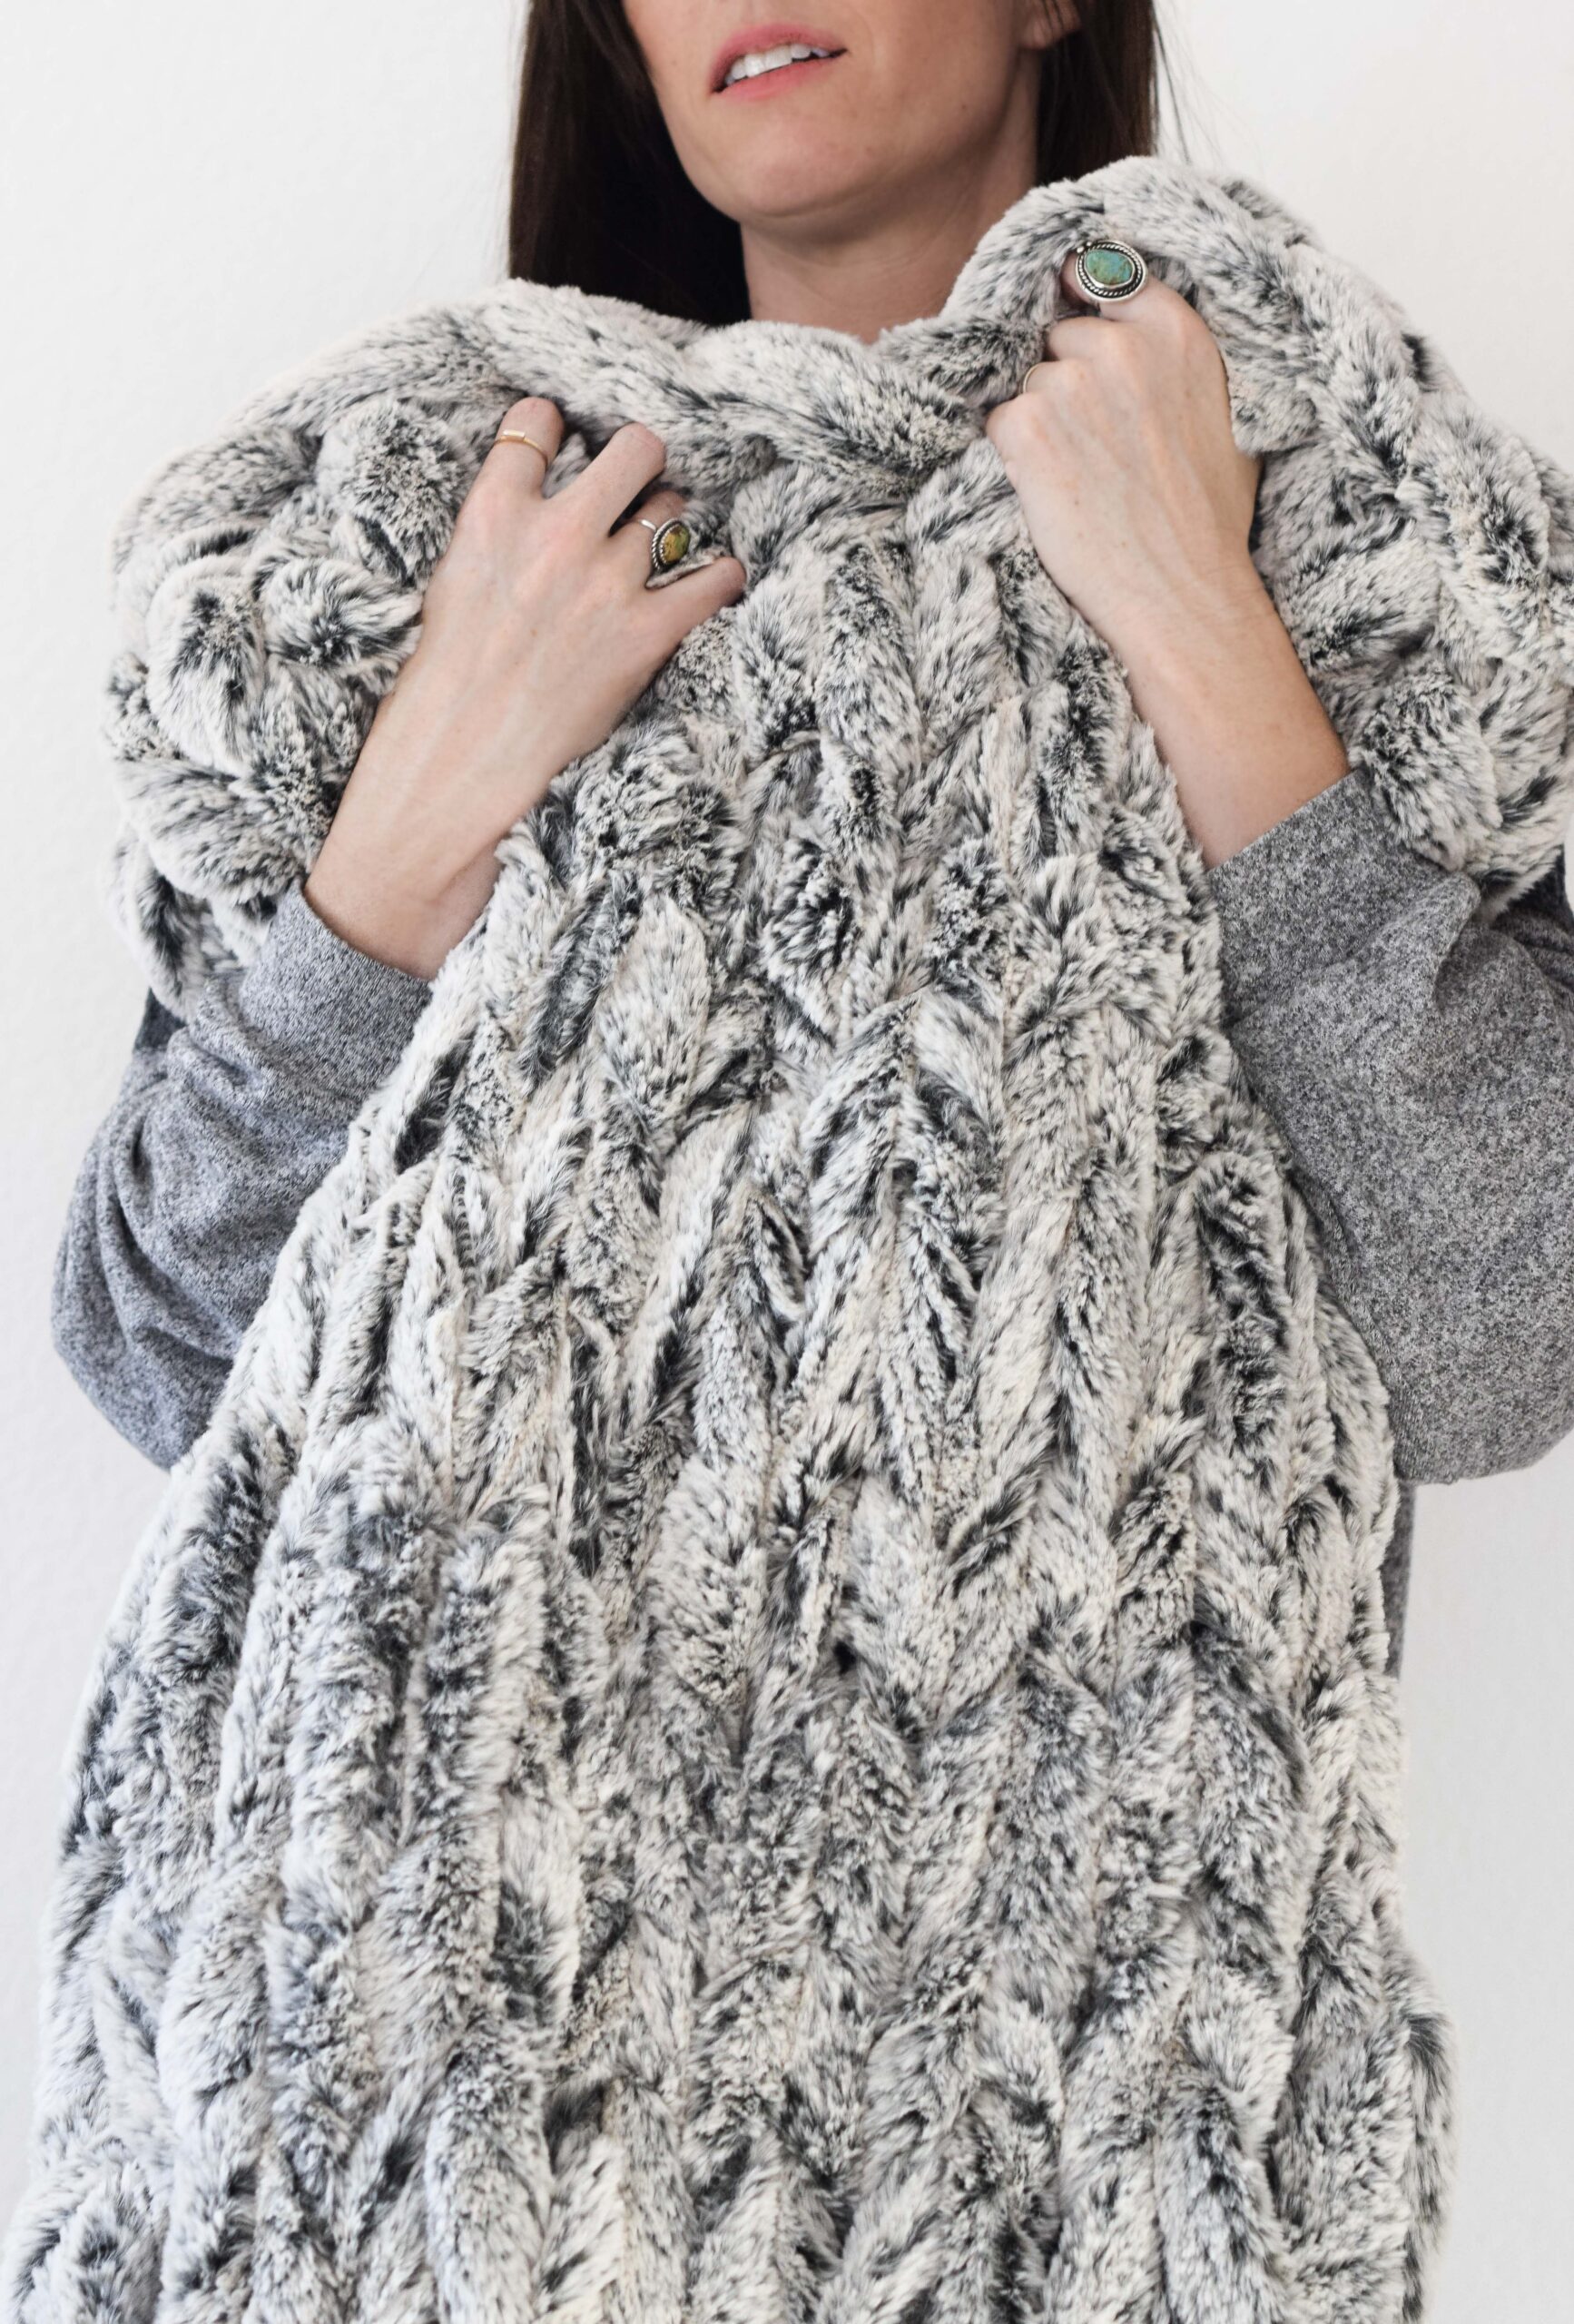 How to Arm Knit a Chunky Blanket in Less Than 1 Hour